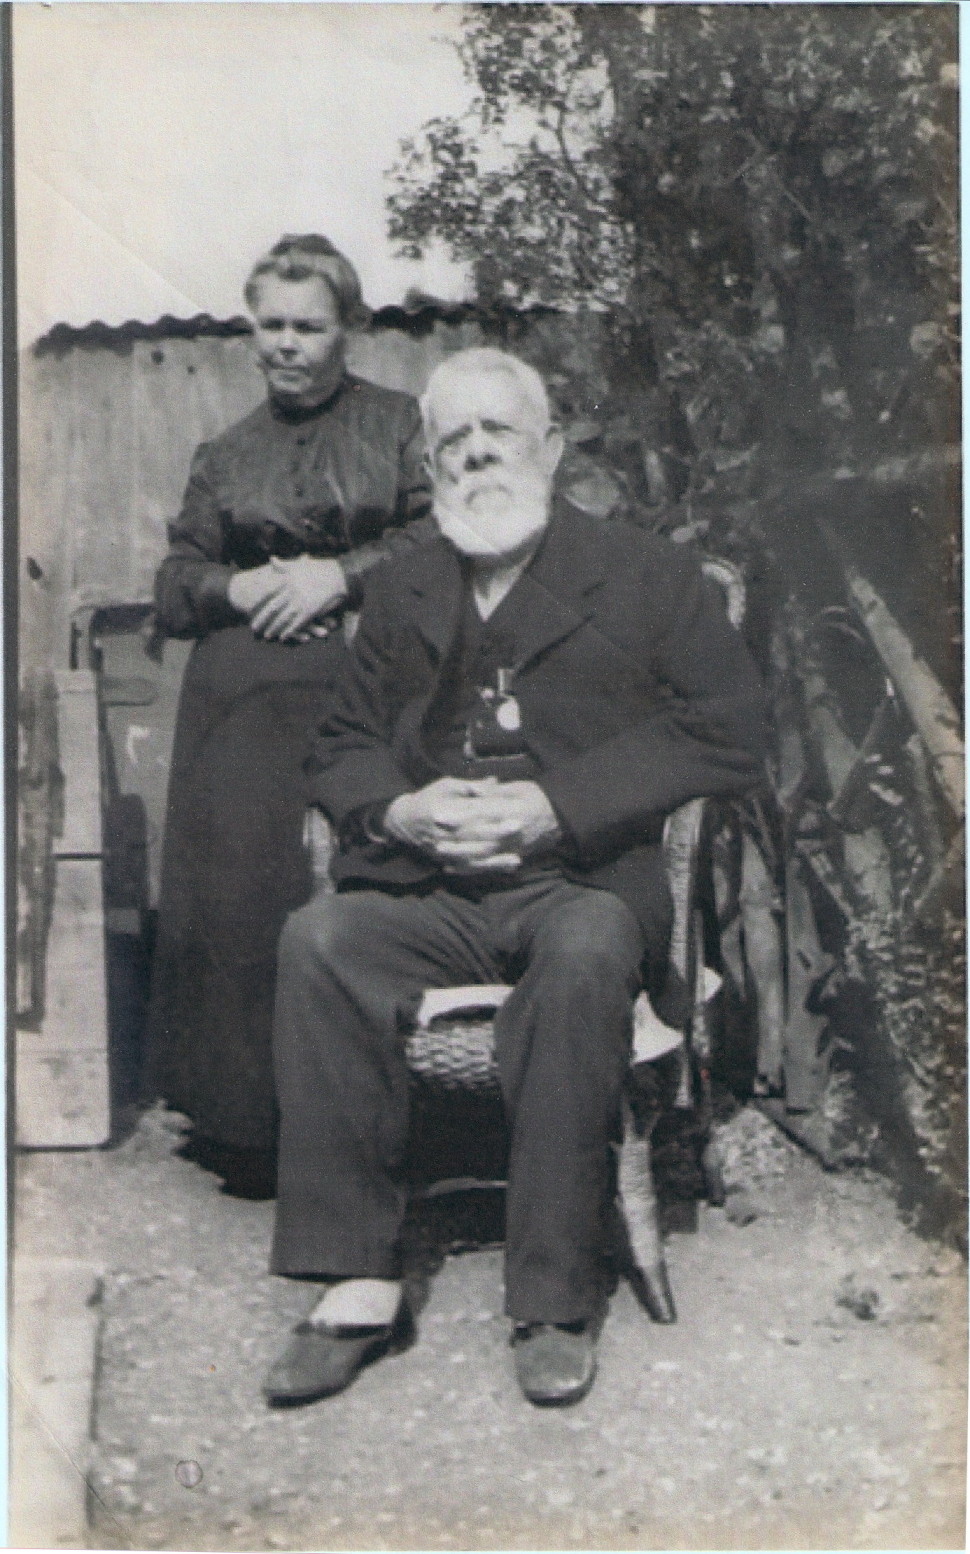 elderly, white-bearded and snub-nosed man in a dark suit, seated in a wicker chair in a garden; a middle-aged woman with blonde hair twisted up in a bun, a dark blouse and an ankle-length black skirt stands behind him on his right